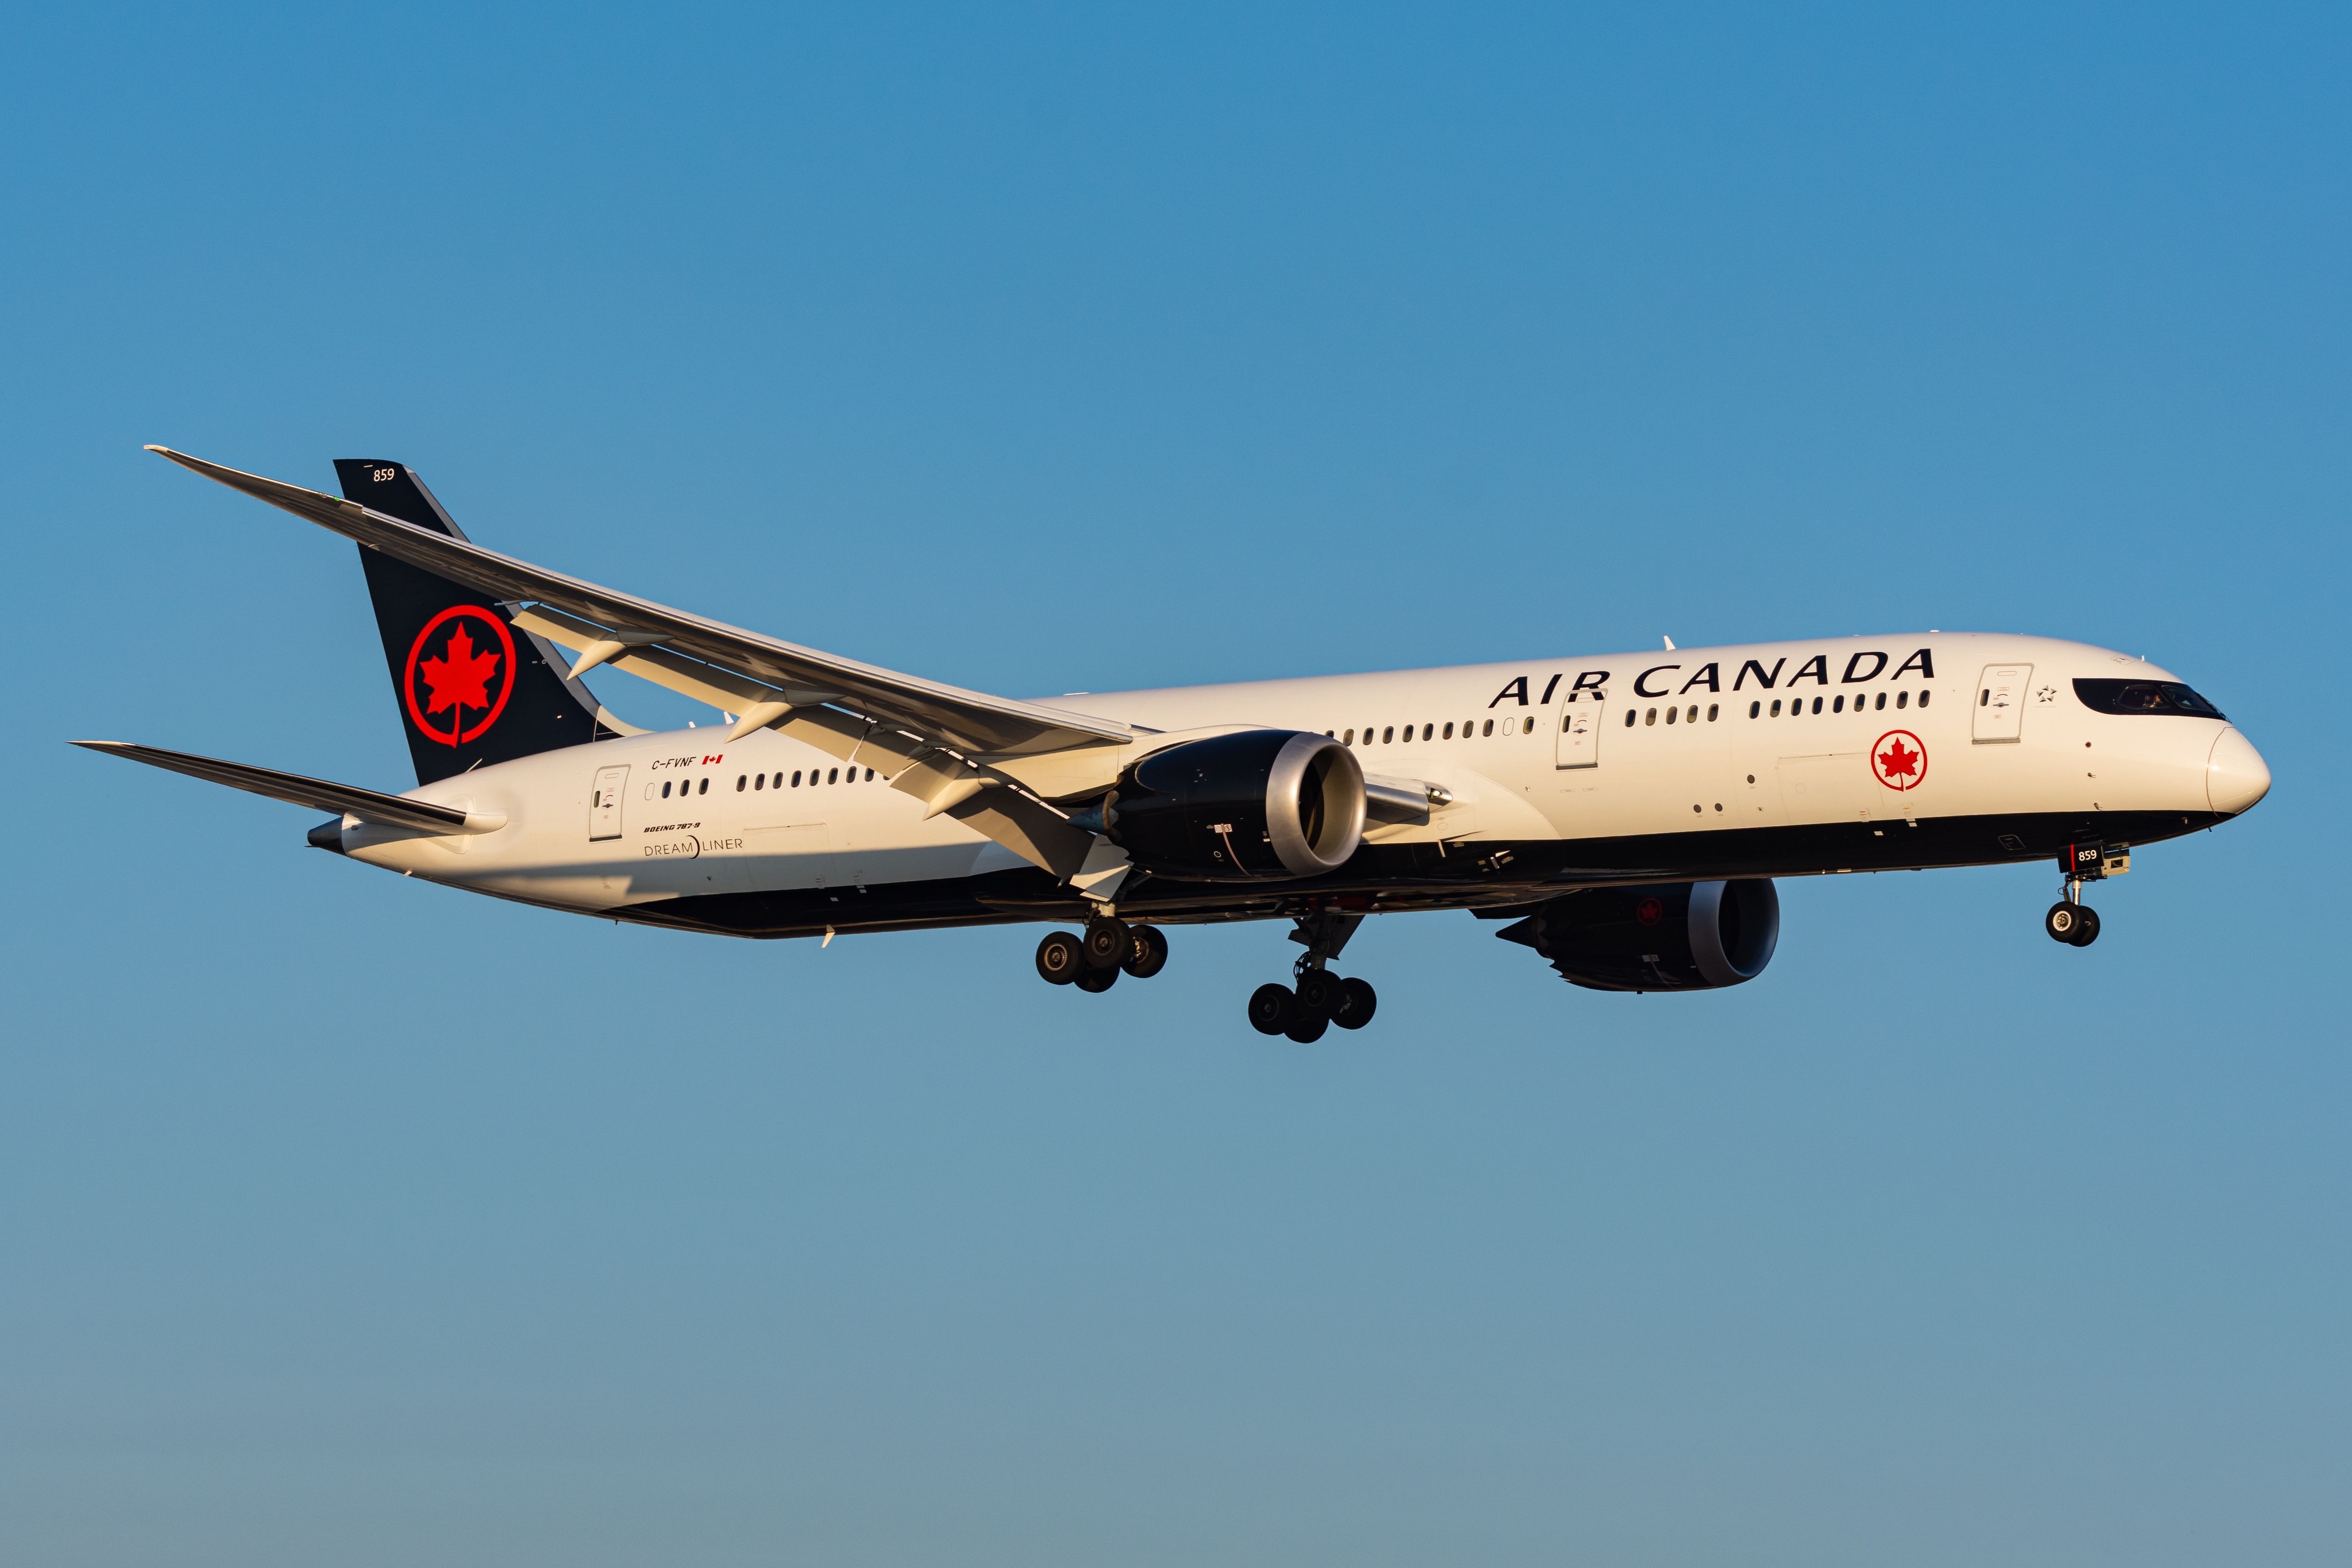  Air Canada Boeing 787-9 Dreamliner on its final approach